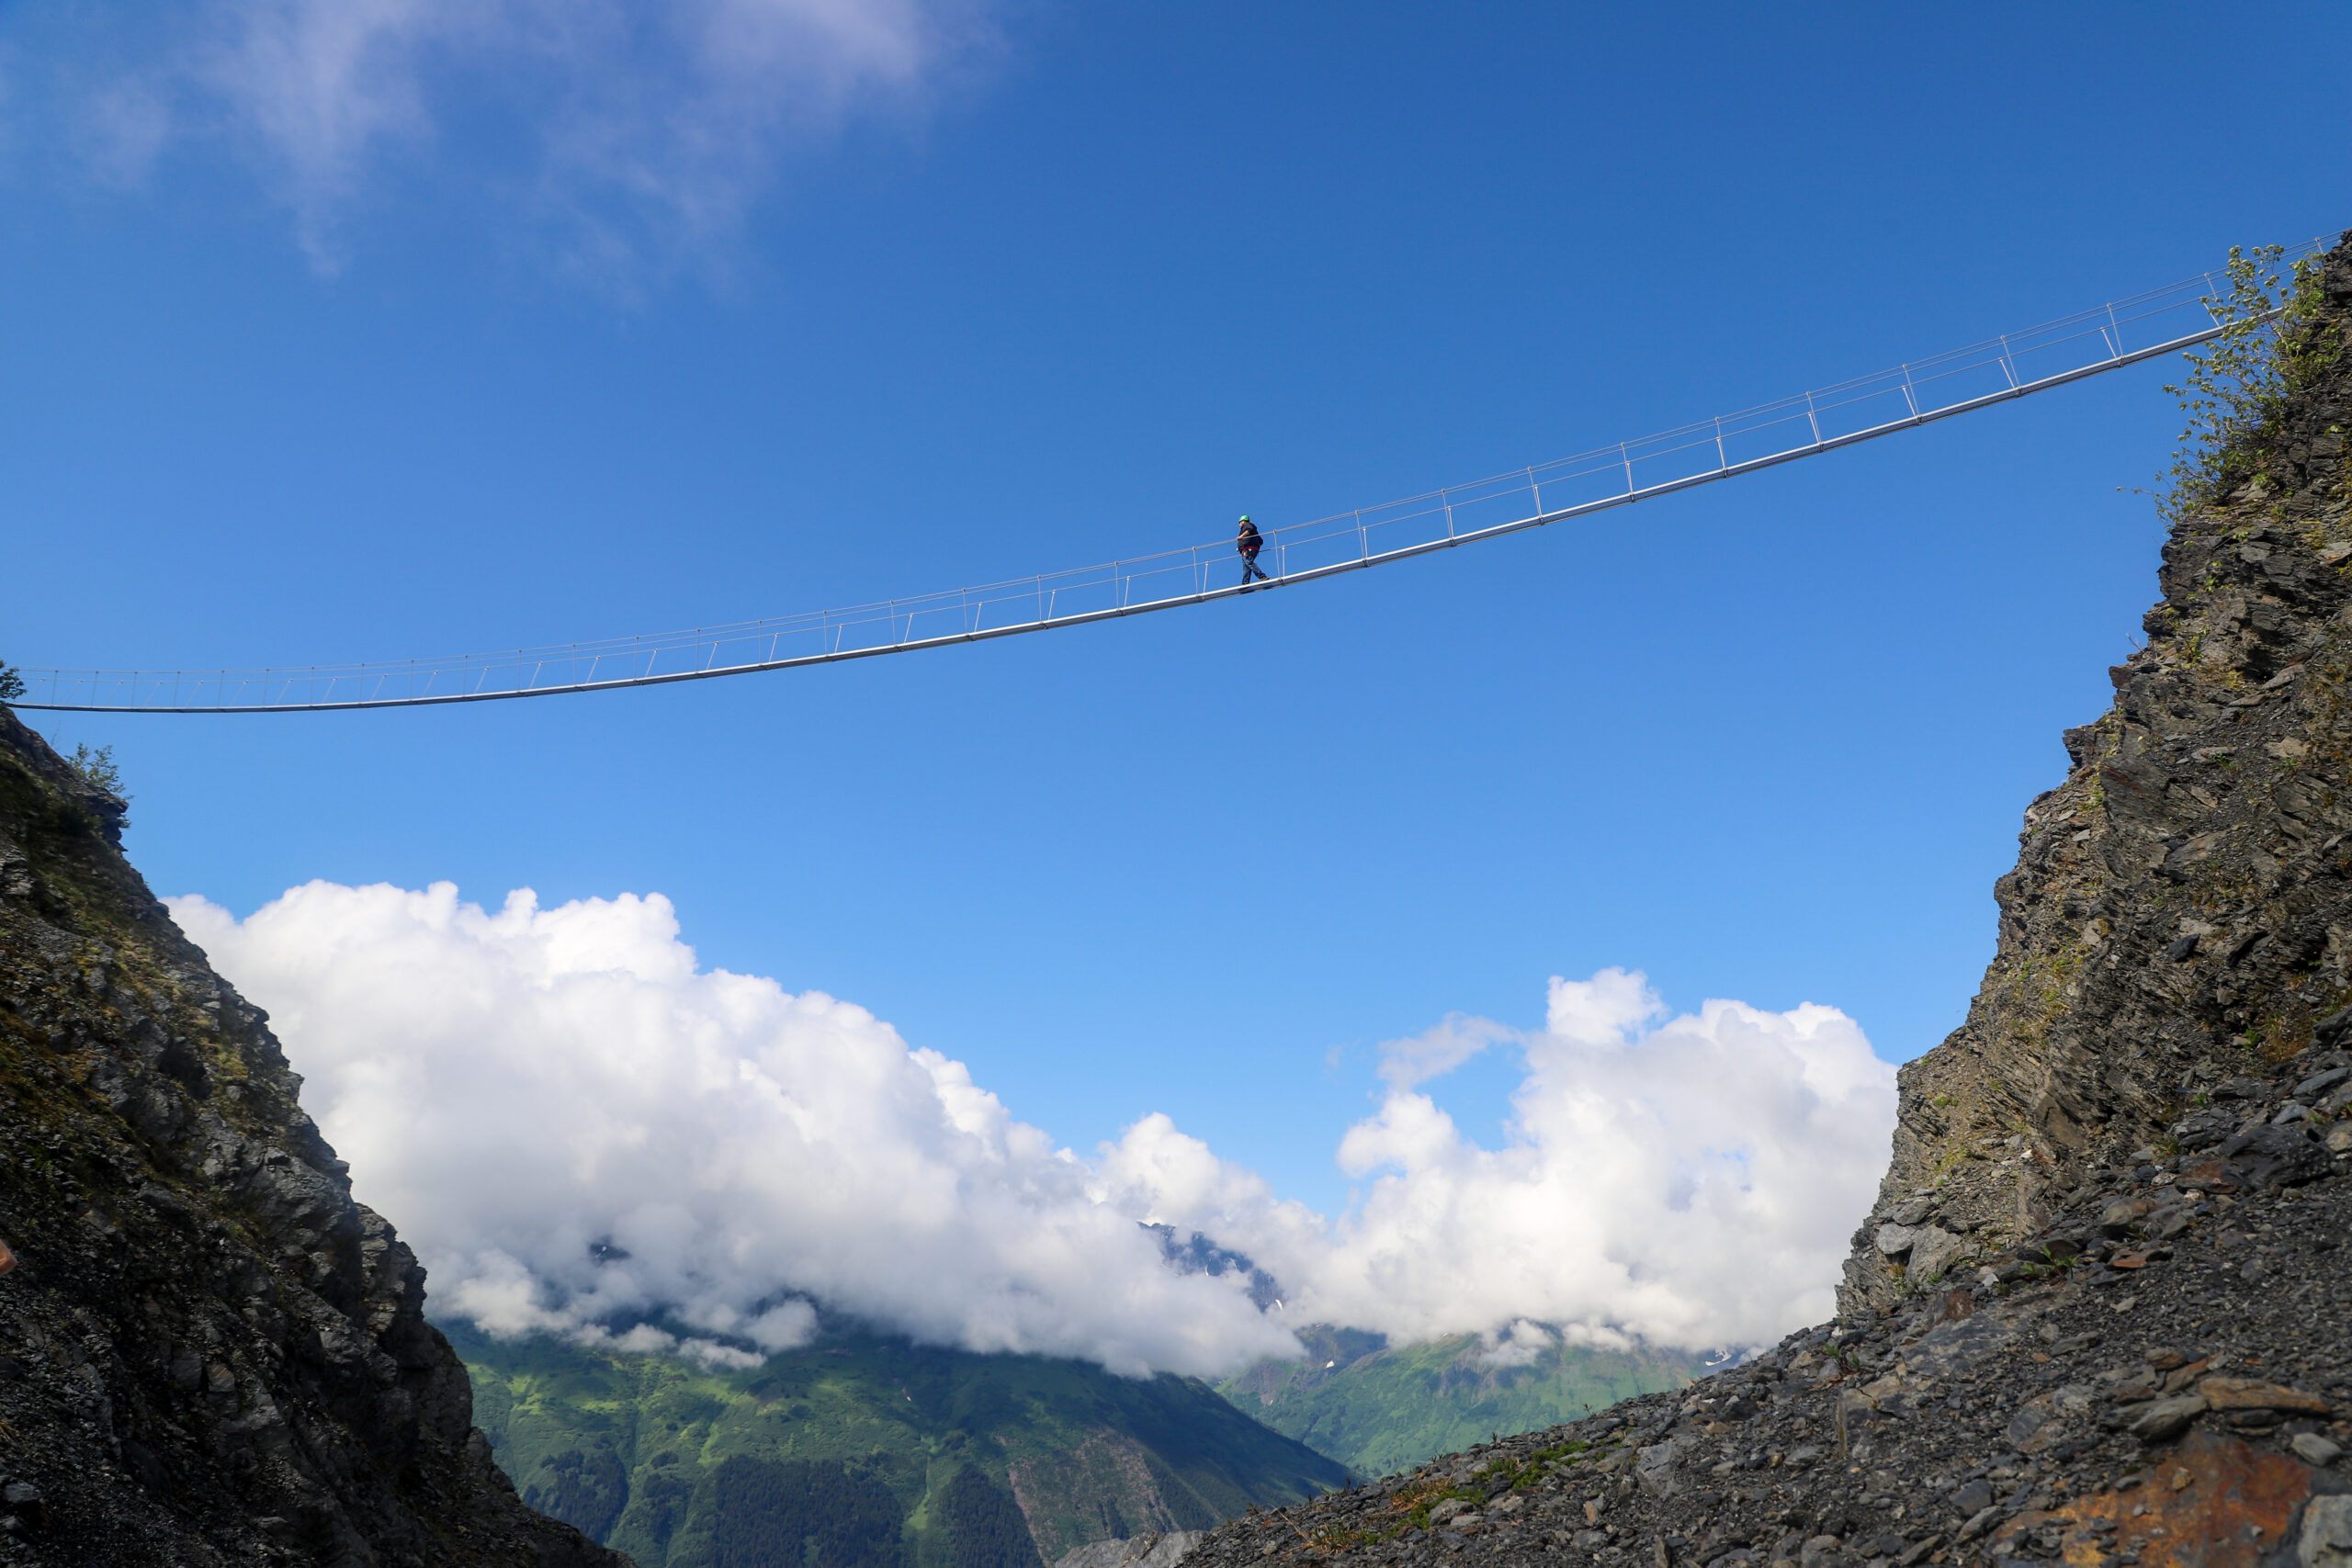 A person walks across a narrow bridge high above the ground, suspended between two cliff sides.